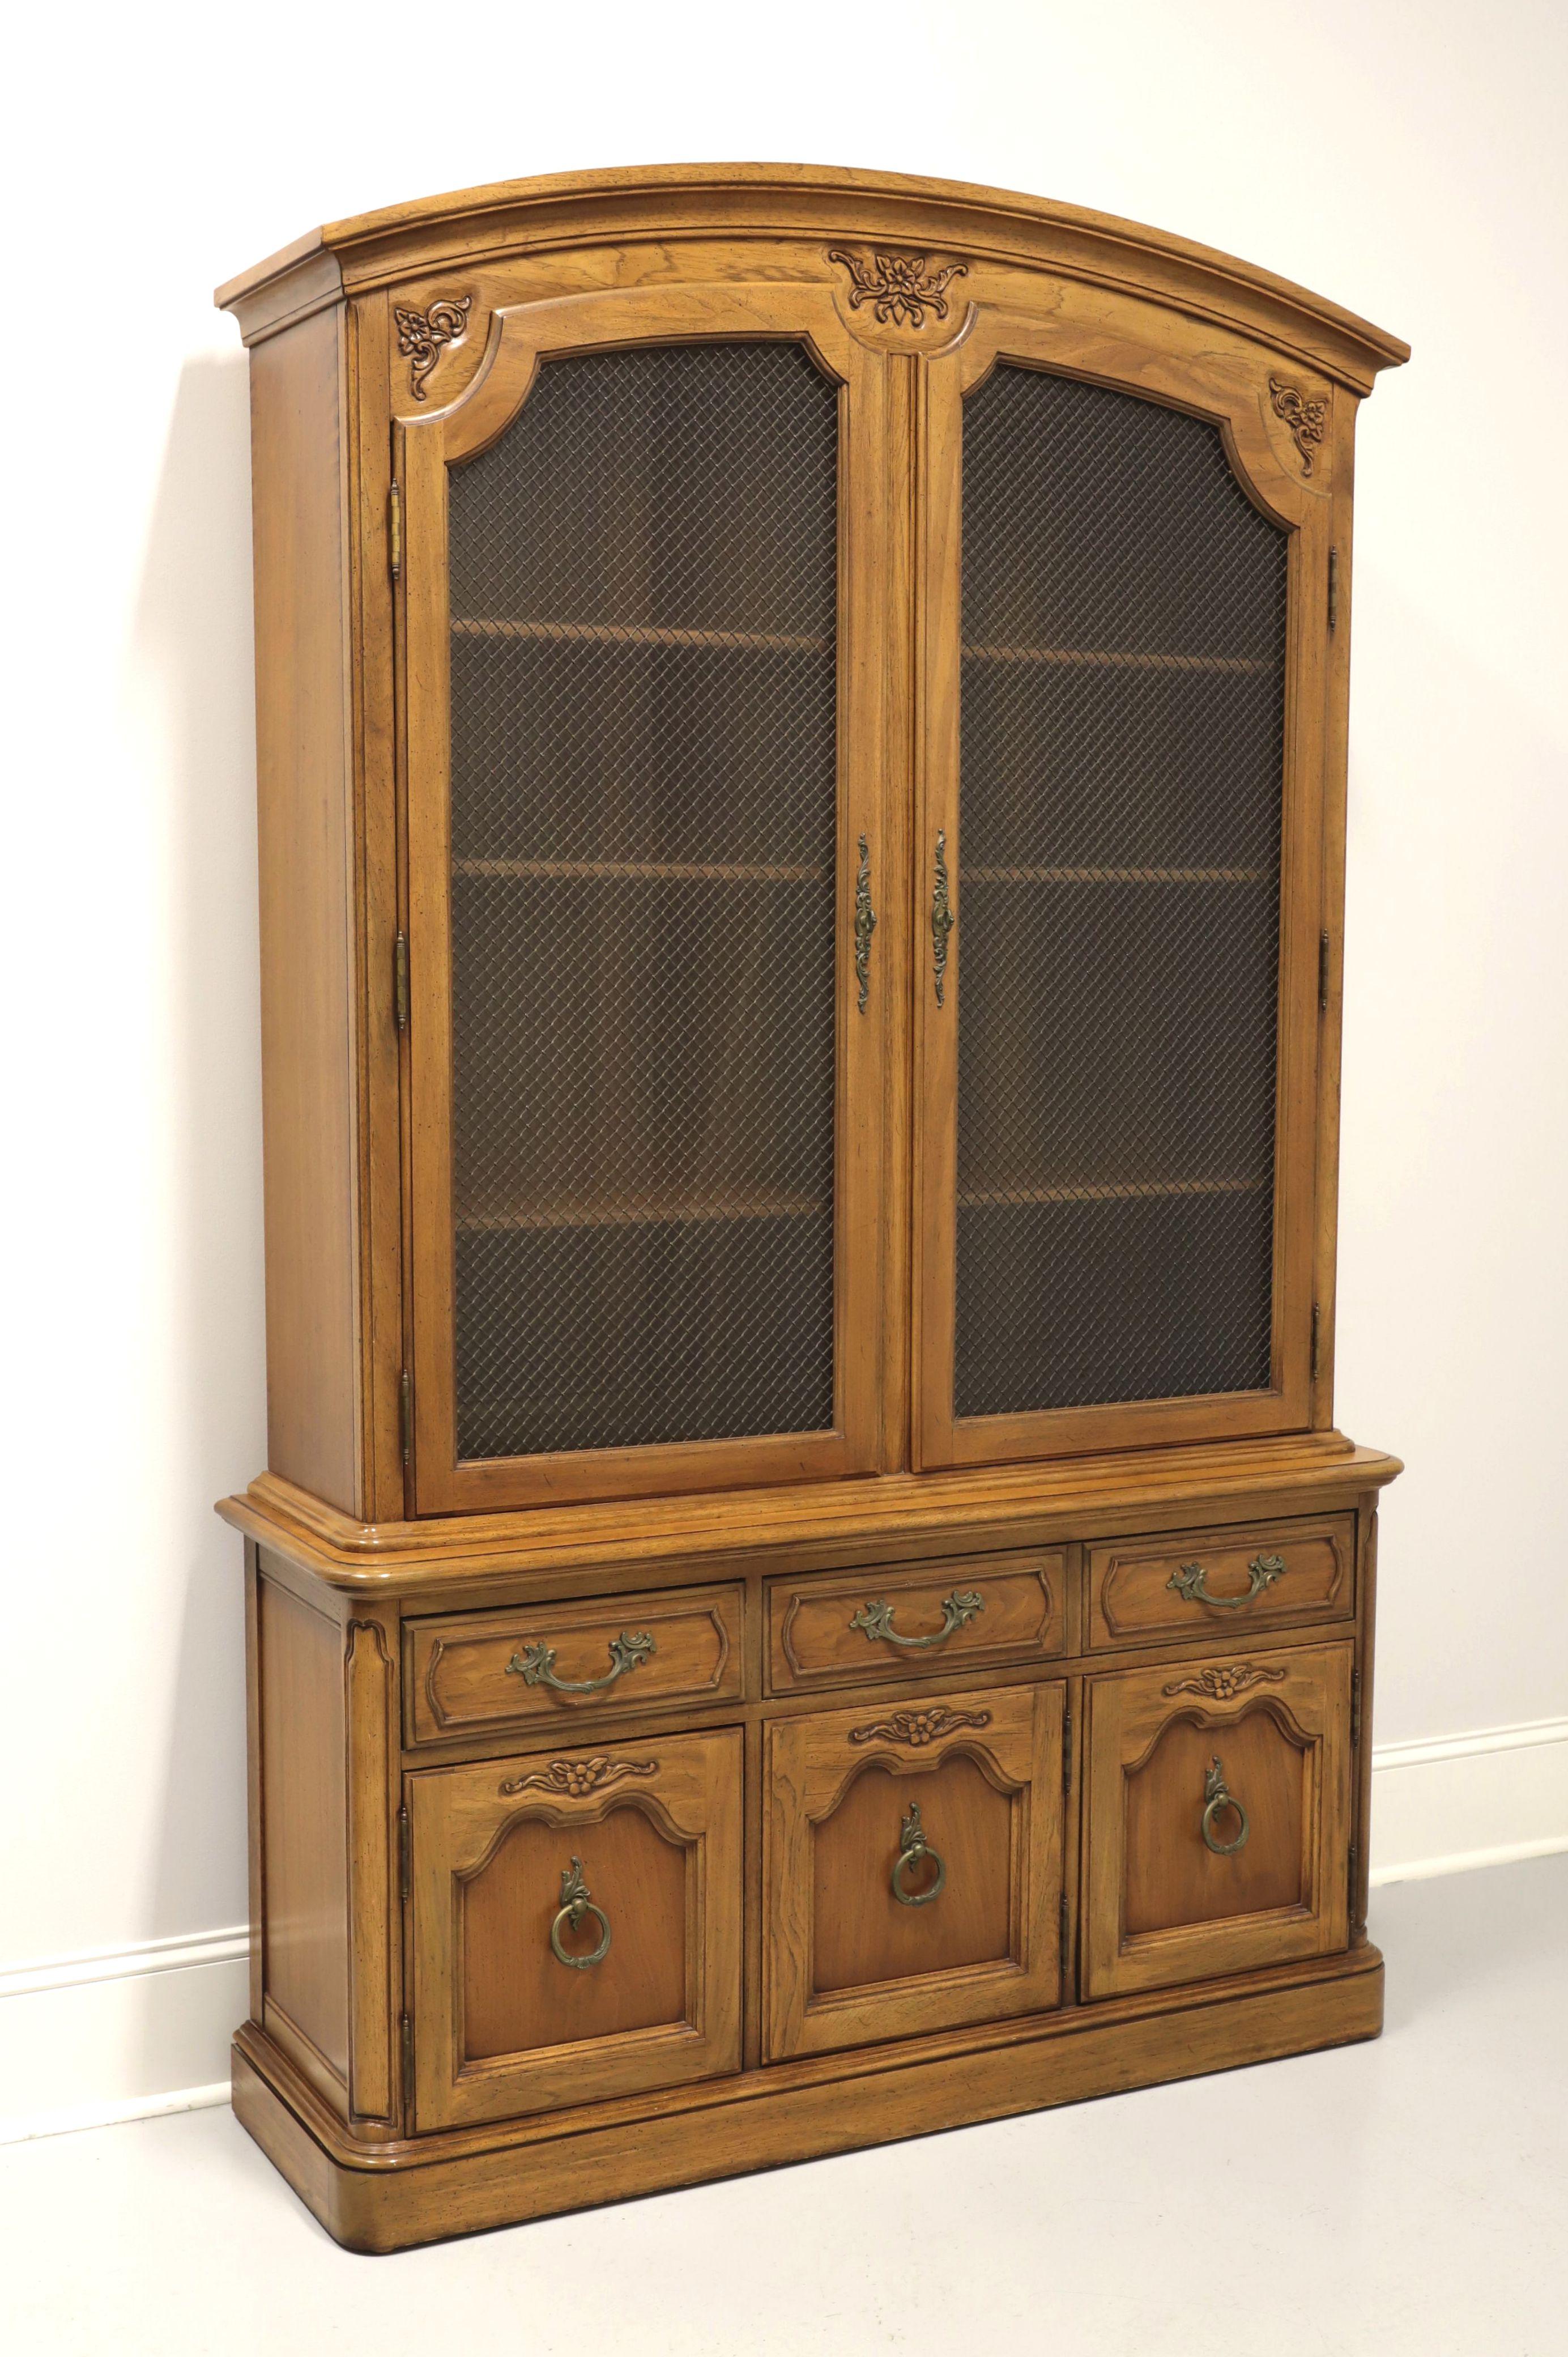 THOMASVILLE Solid Oak French Country China Cabinet 5